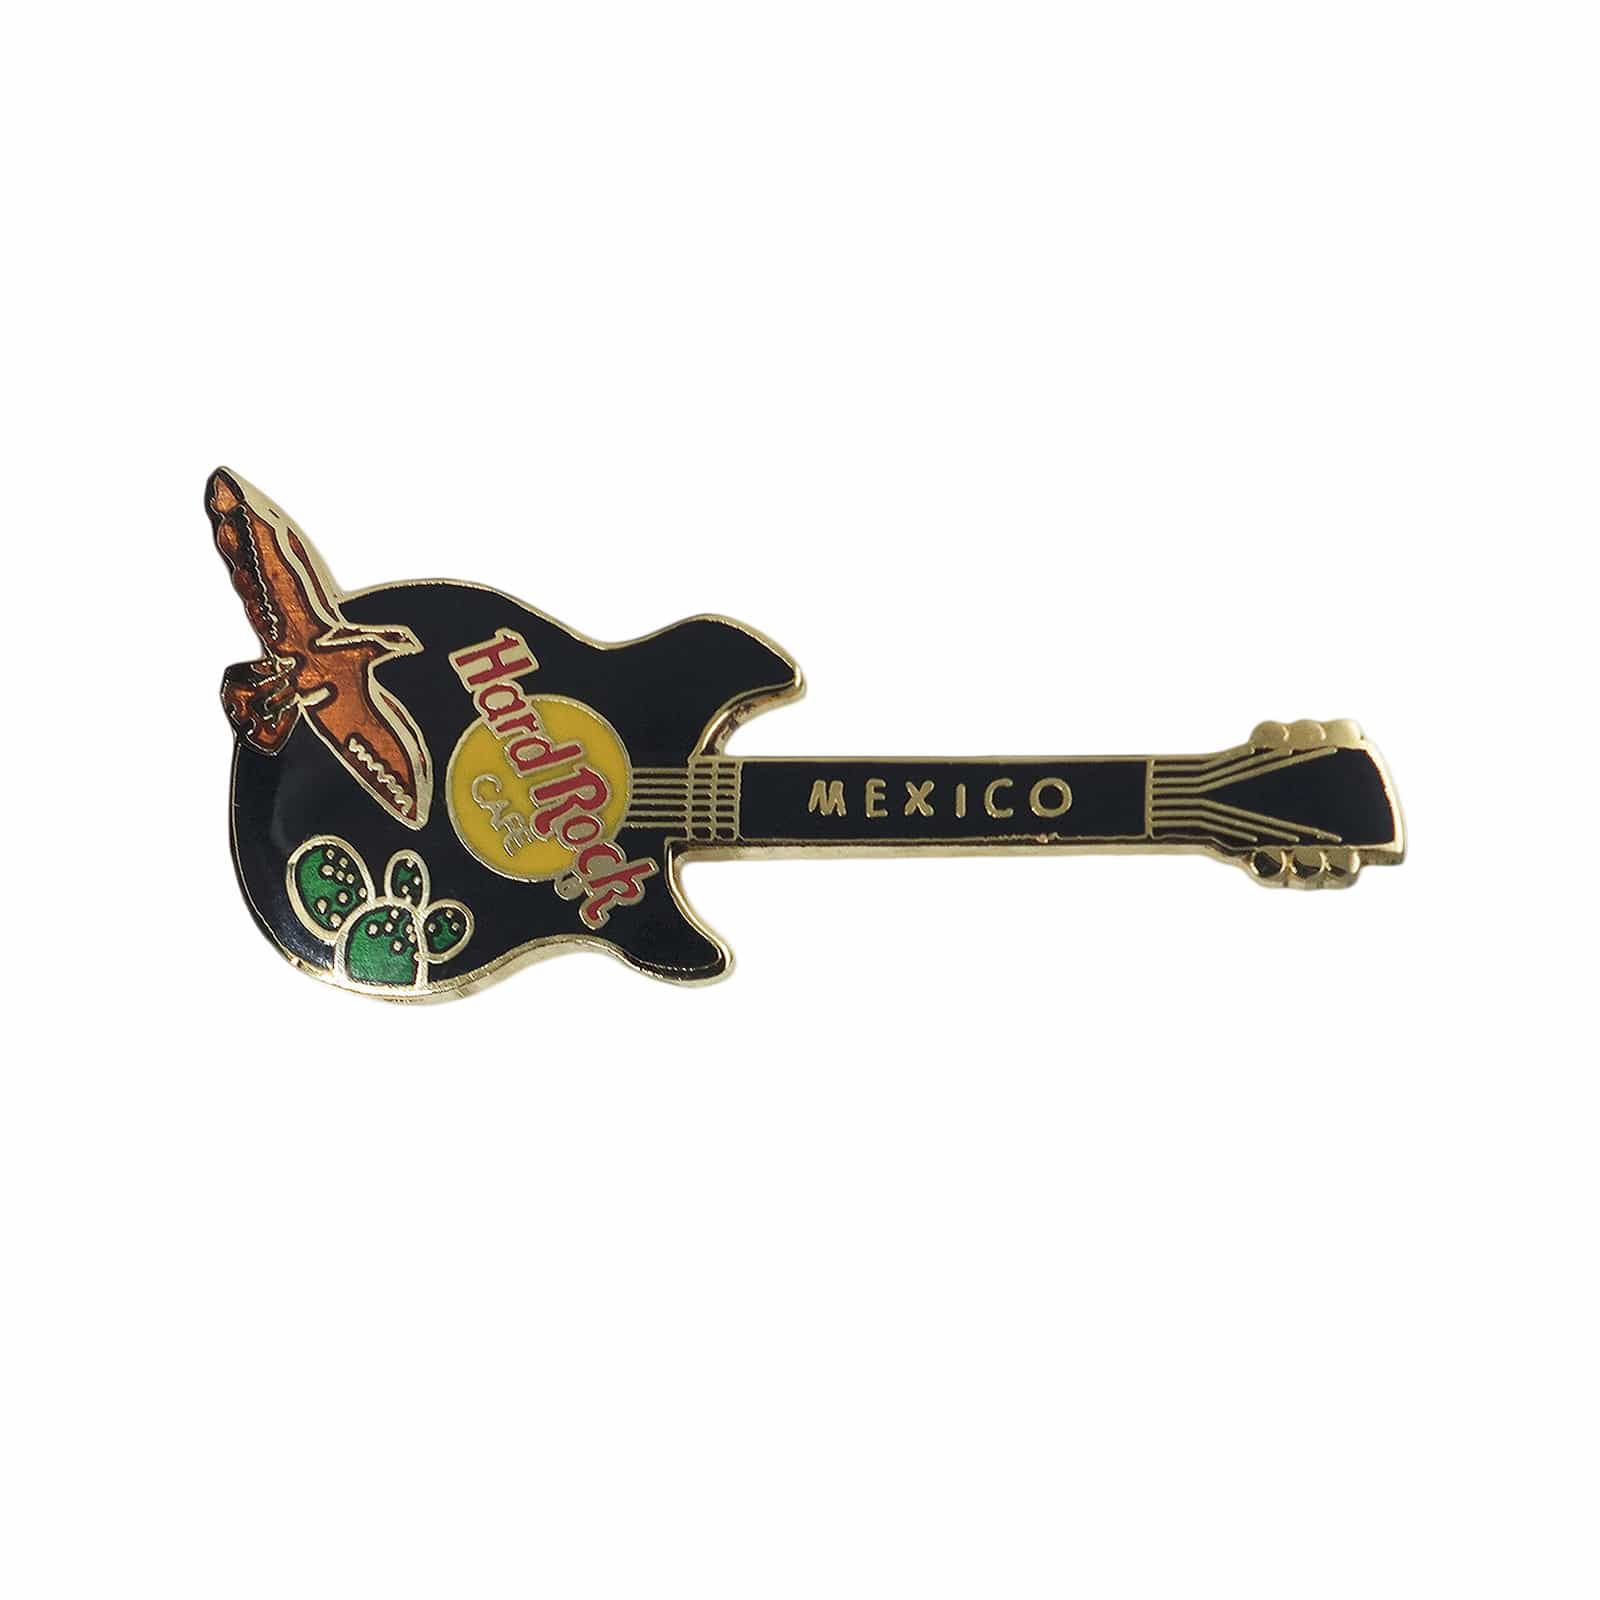 Hard Rock CAFE ギター ピンズ ハードロックカフェ MEXICO 留め具付き